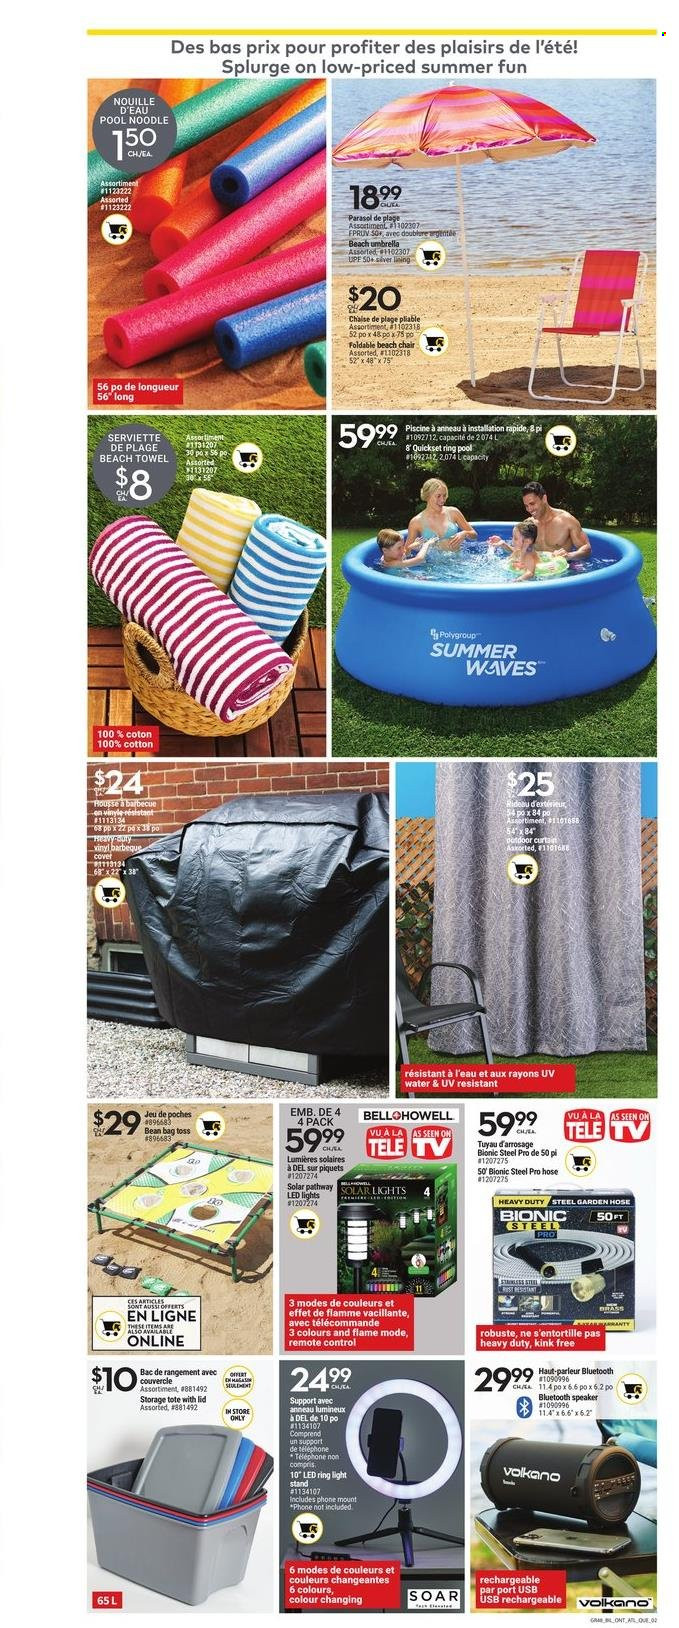 thumbnail - Giant Tiger Flyer - June 29, 2022 - July 05, 2022 - Sales products - chair, noodles, curtain, towel, beach towel, mobile phone holder, TV, speaker, bluetooth speaker, Volkano, remote control, bean bag, beach chair, umbrella, pool noodle, LED light, vinyl, storage tote, beach umbrella, garden hose. Page 4.